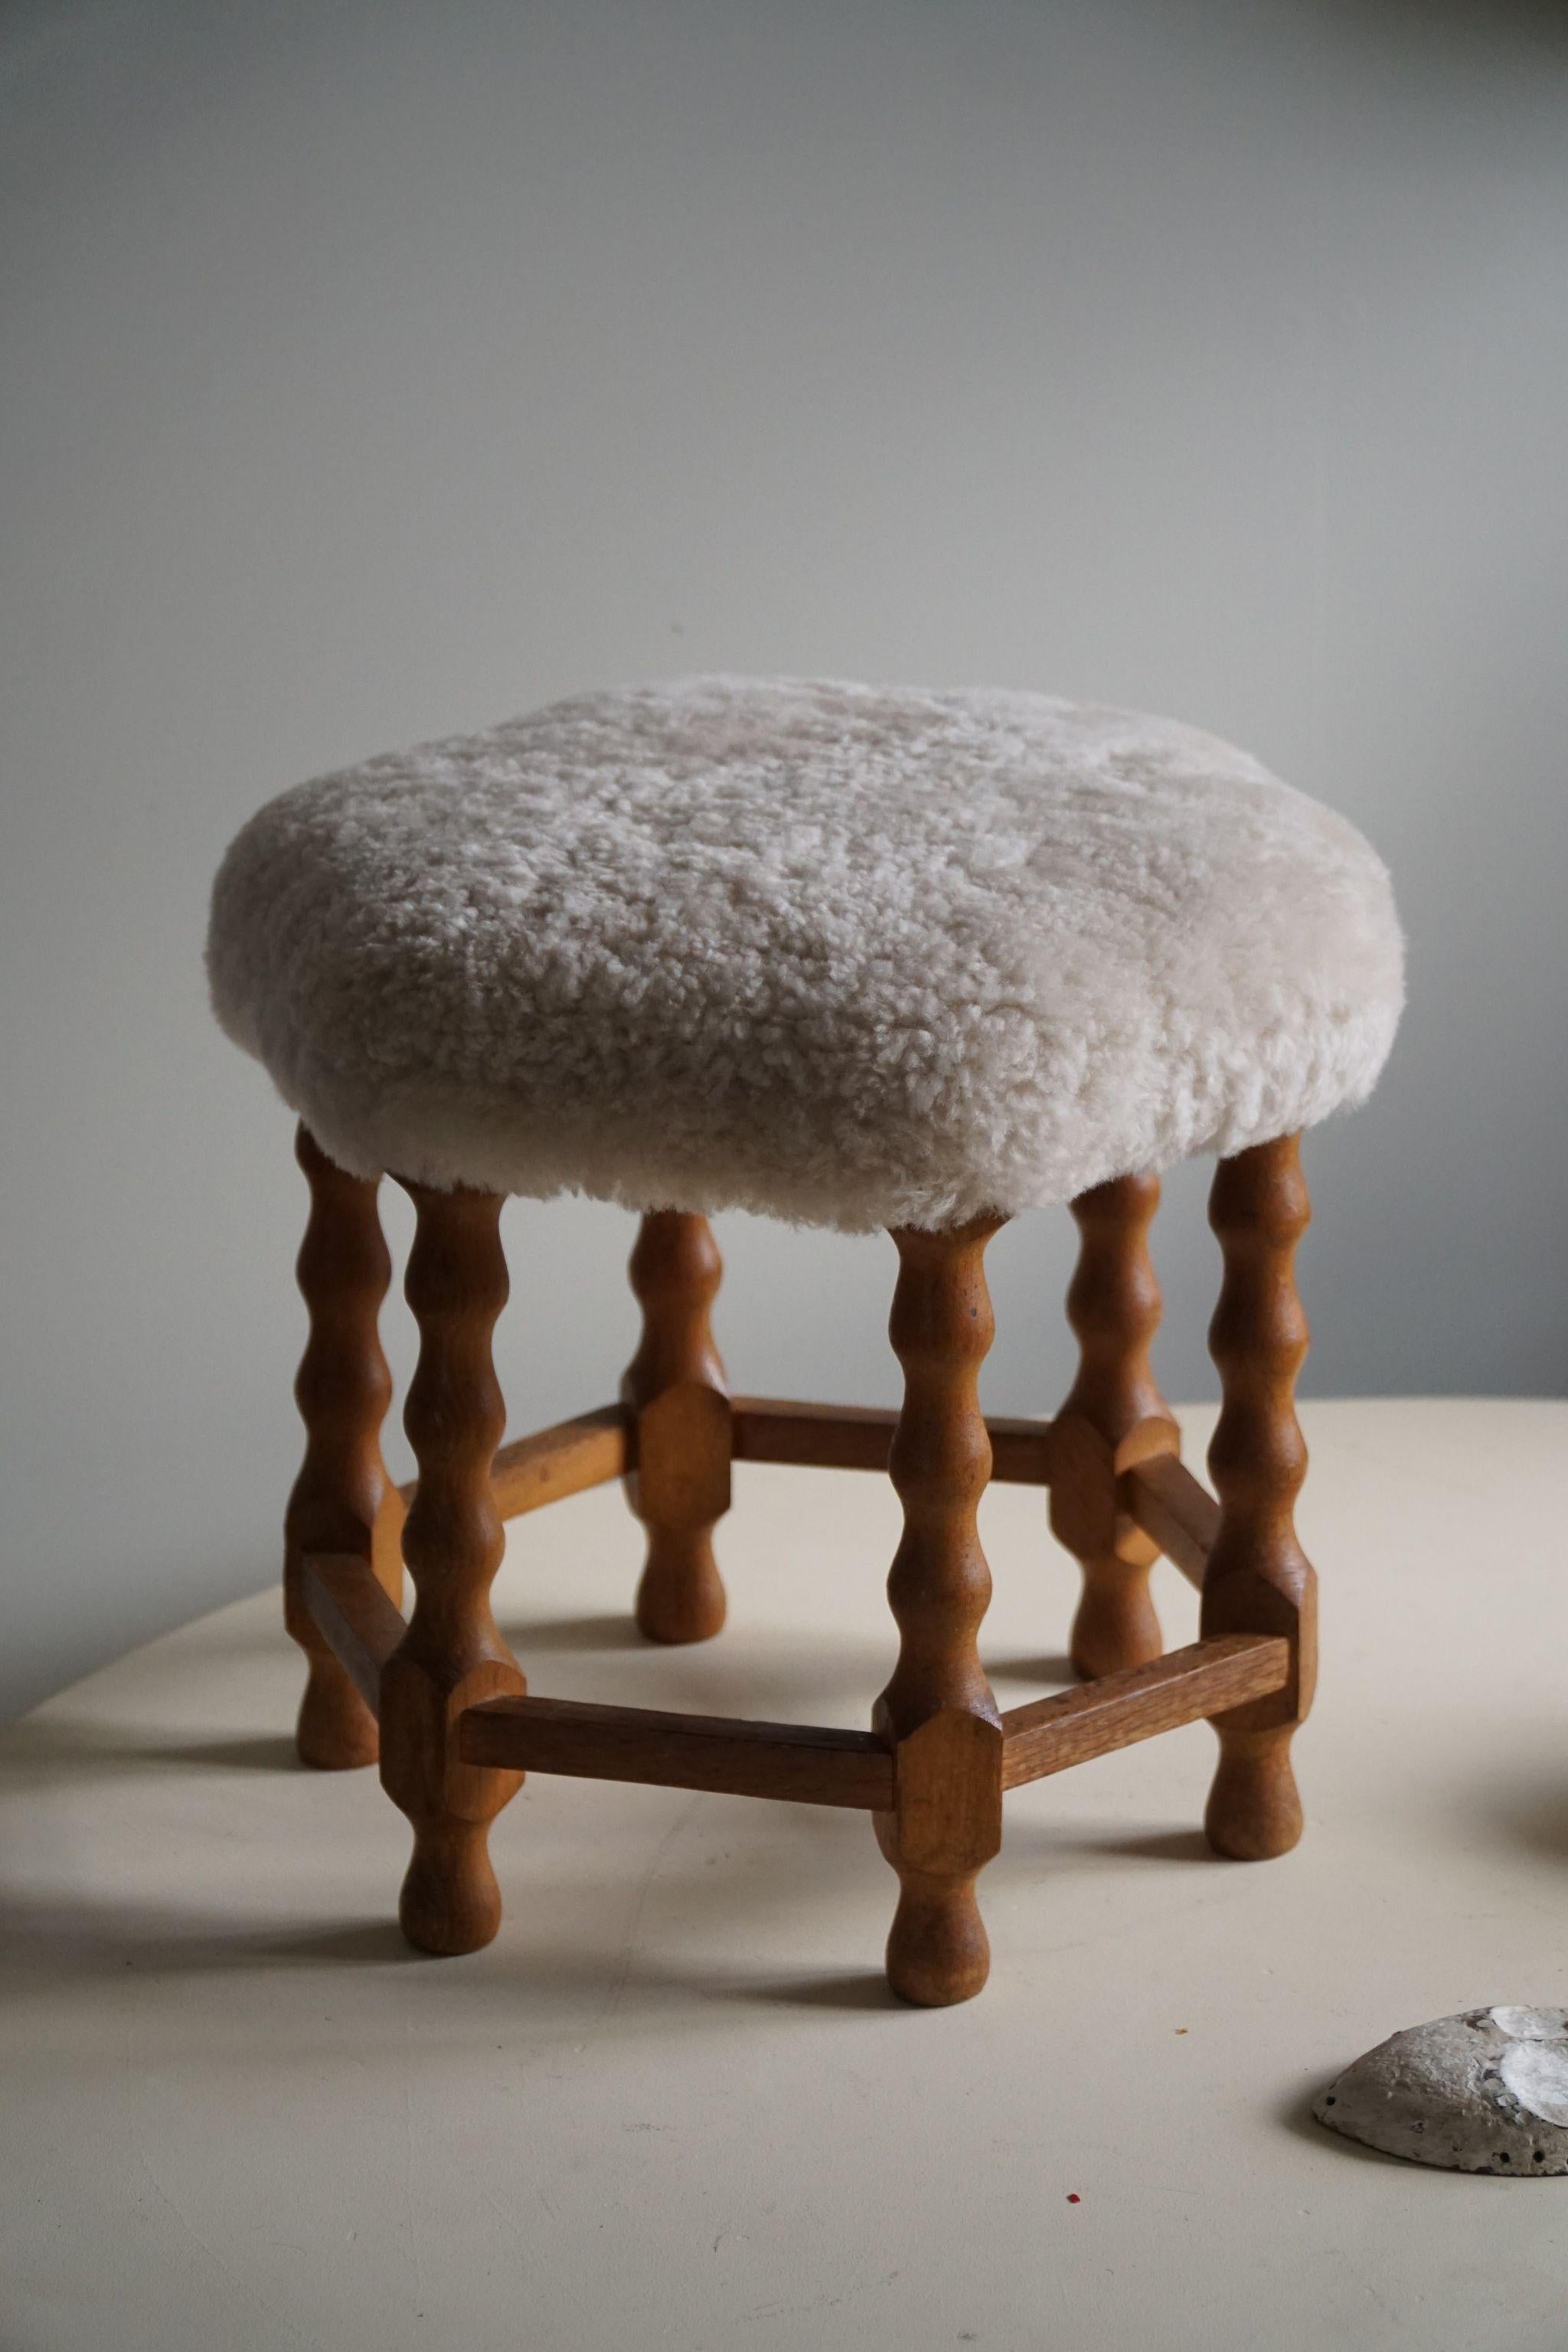 Baroque Danish Modern, A Hexagon Stool in Oak, Reupholstered Seat in Lambswool, 1950s For Sale